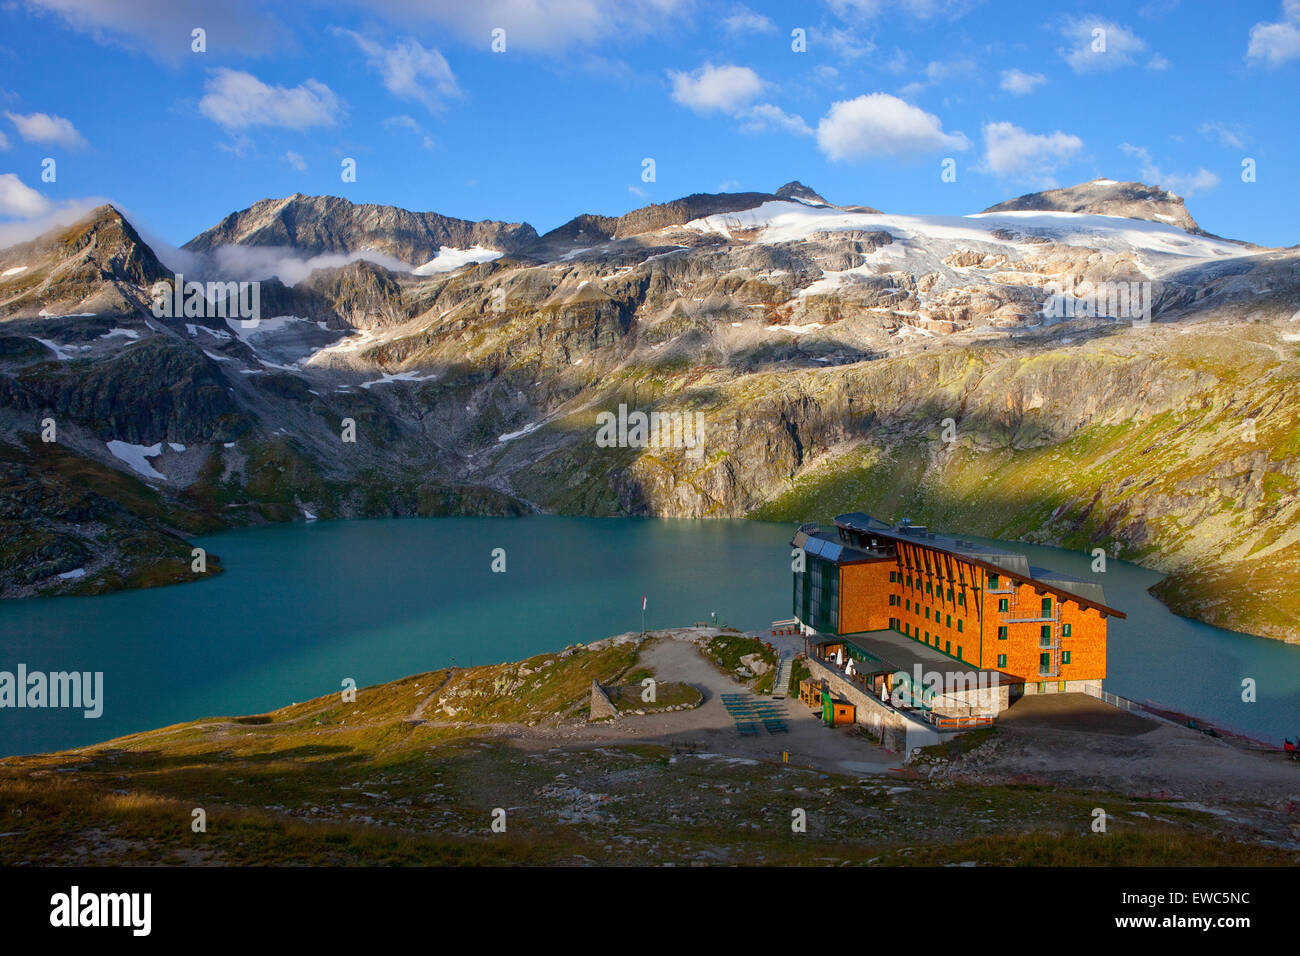 The Rudolfshut with the Weisssee mountain lake, one of the huts hikers stay  at during the Glocknerrunde, a 7 stage trekking Stock Photo - Alamy